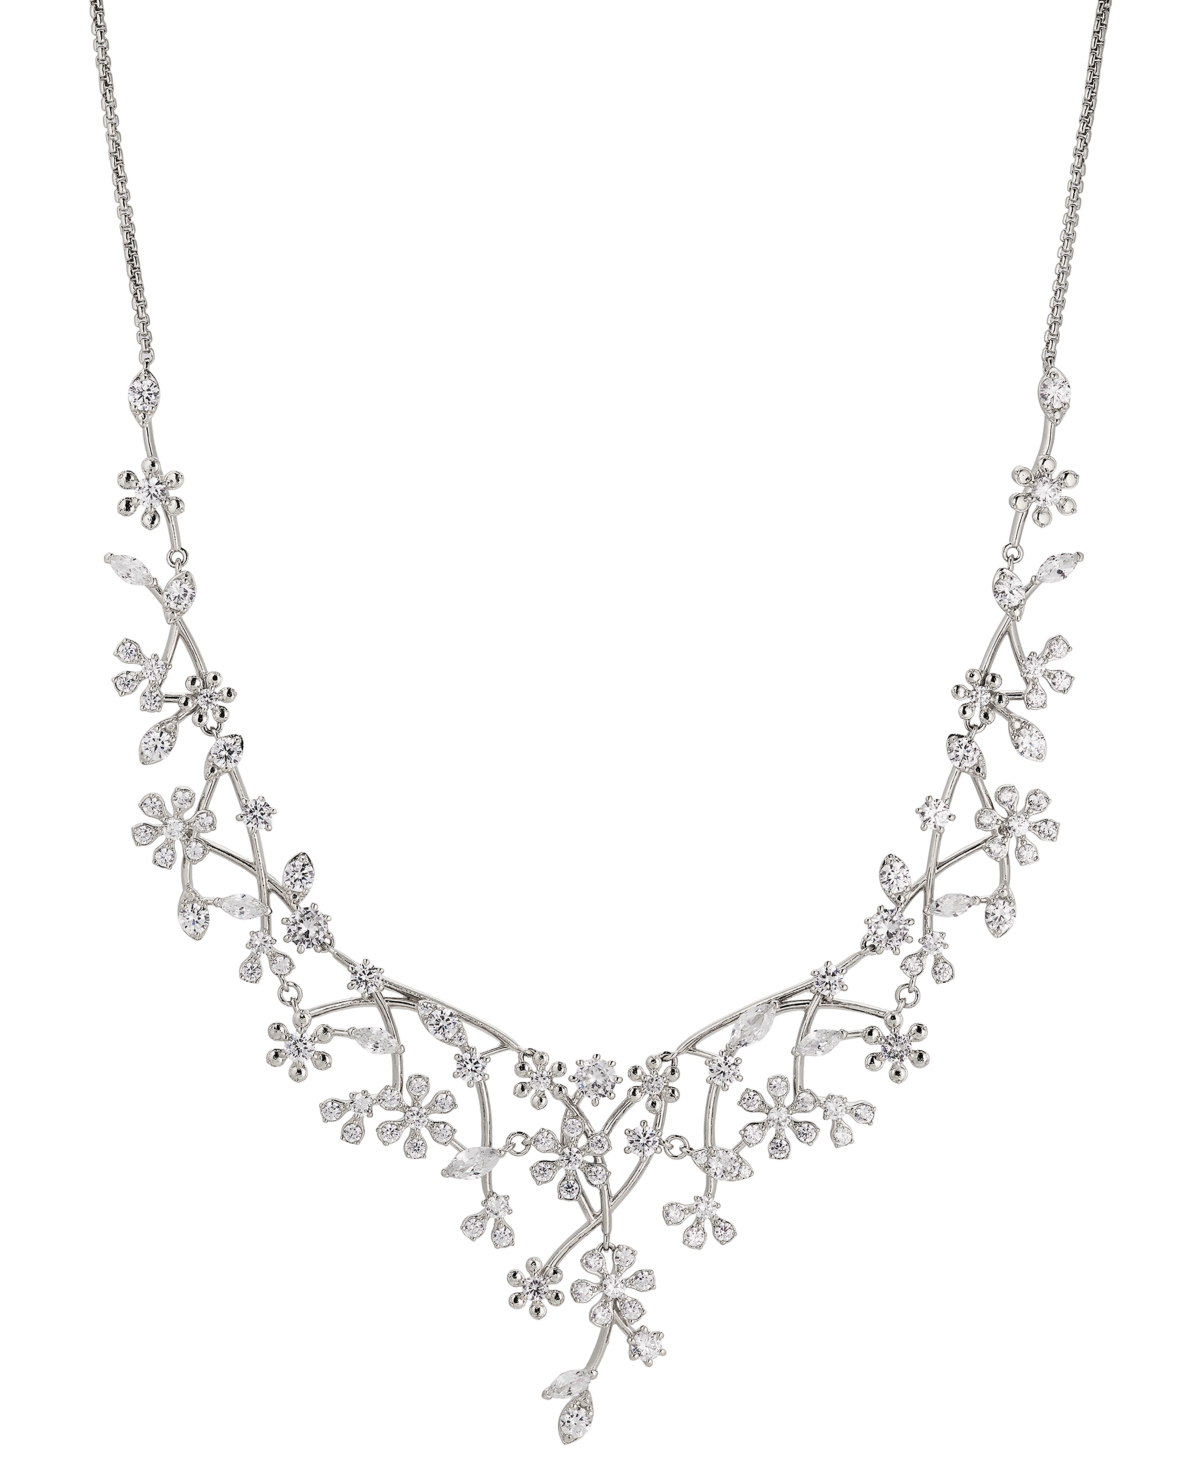 Rhodium-Plated Cubic Zirconia Flower Statement Necklace, 16" + 2" extender, Created for Macy's - Gold